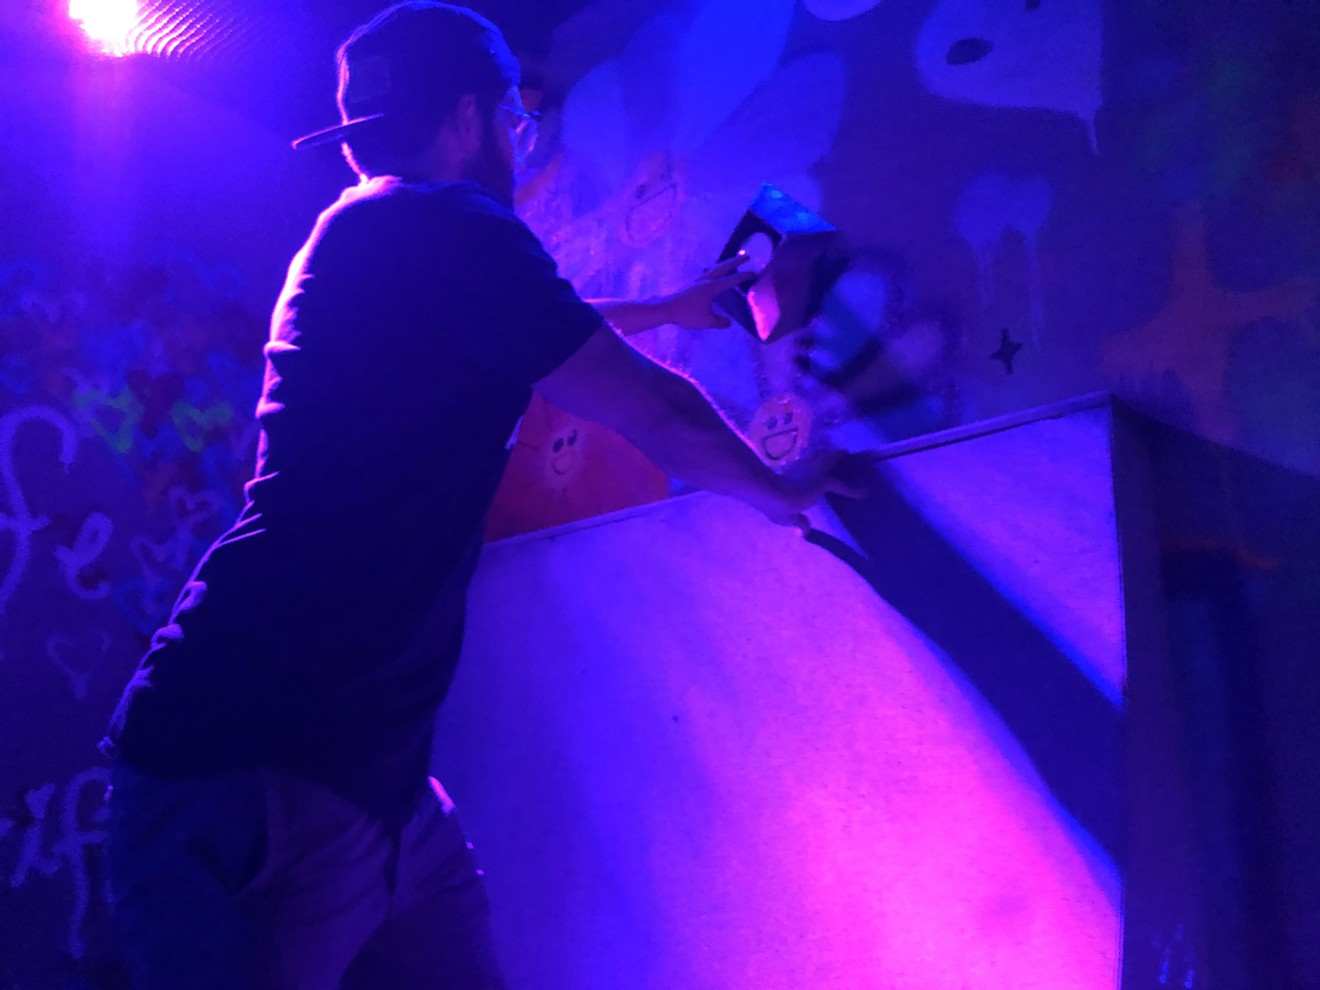 Lewisville Labyrinth owner Raleigh Williams tests one of the interactive sensors in the Ninja Room, one of 42 challenges in his new immersive entertainment experience.